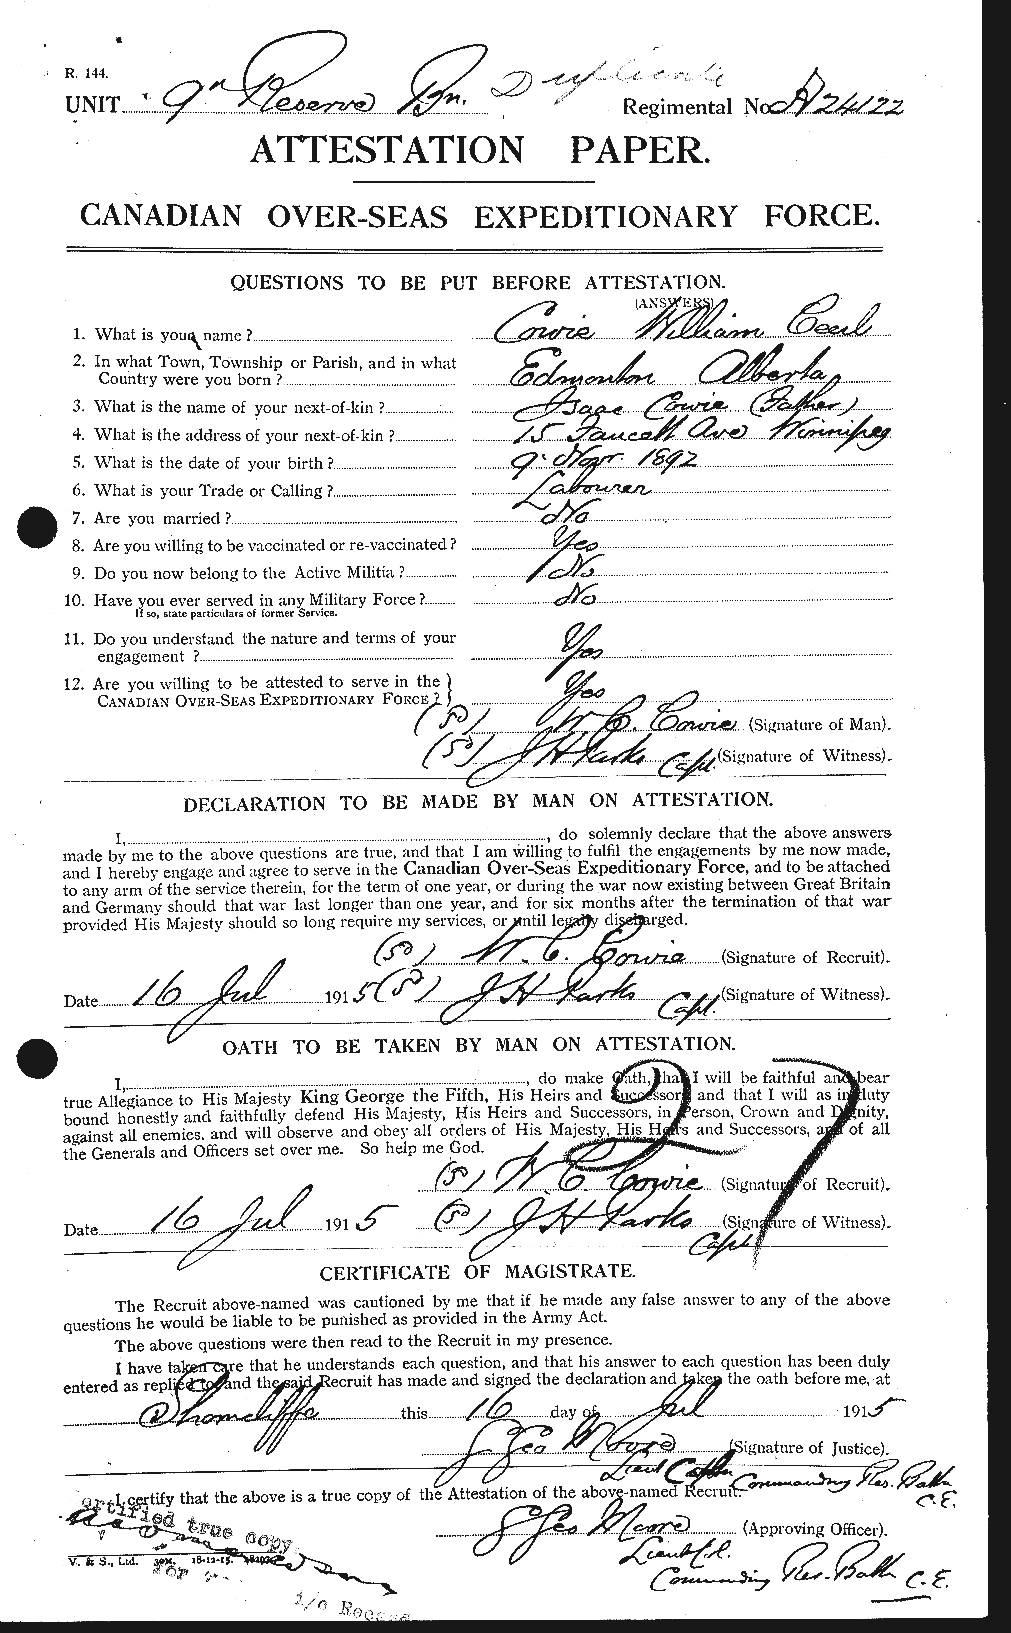 Personnel Records of the First World War - CEF 059862a